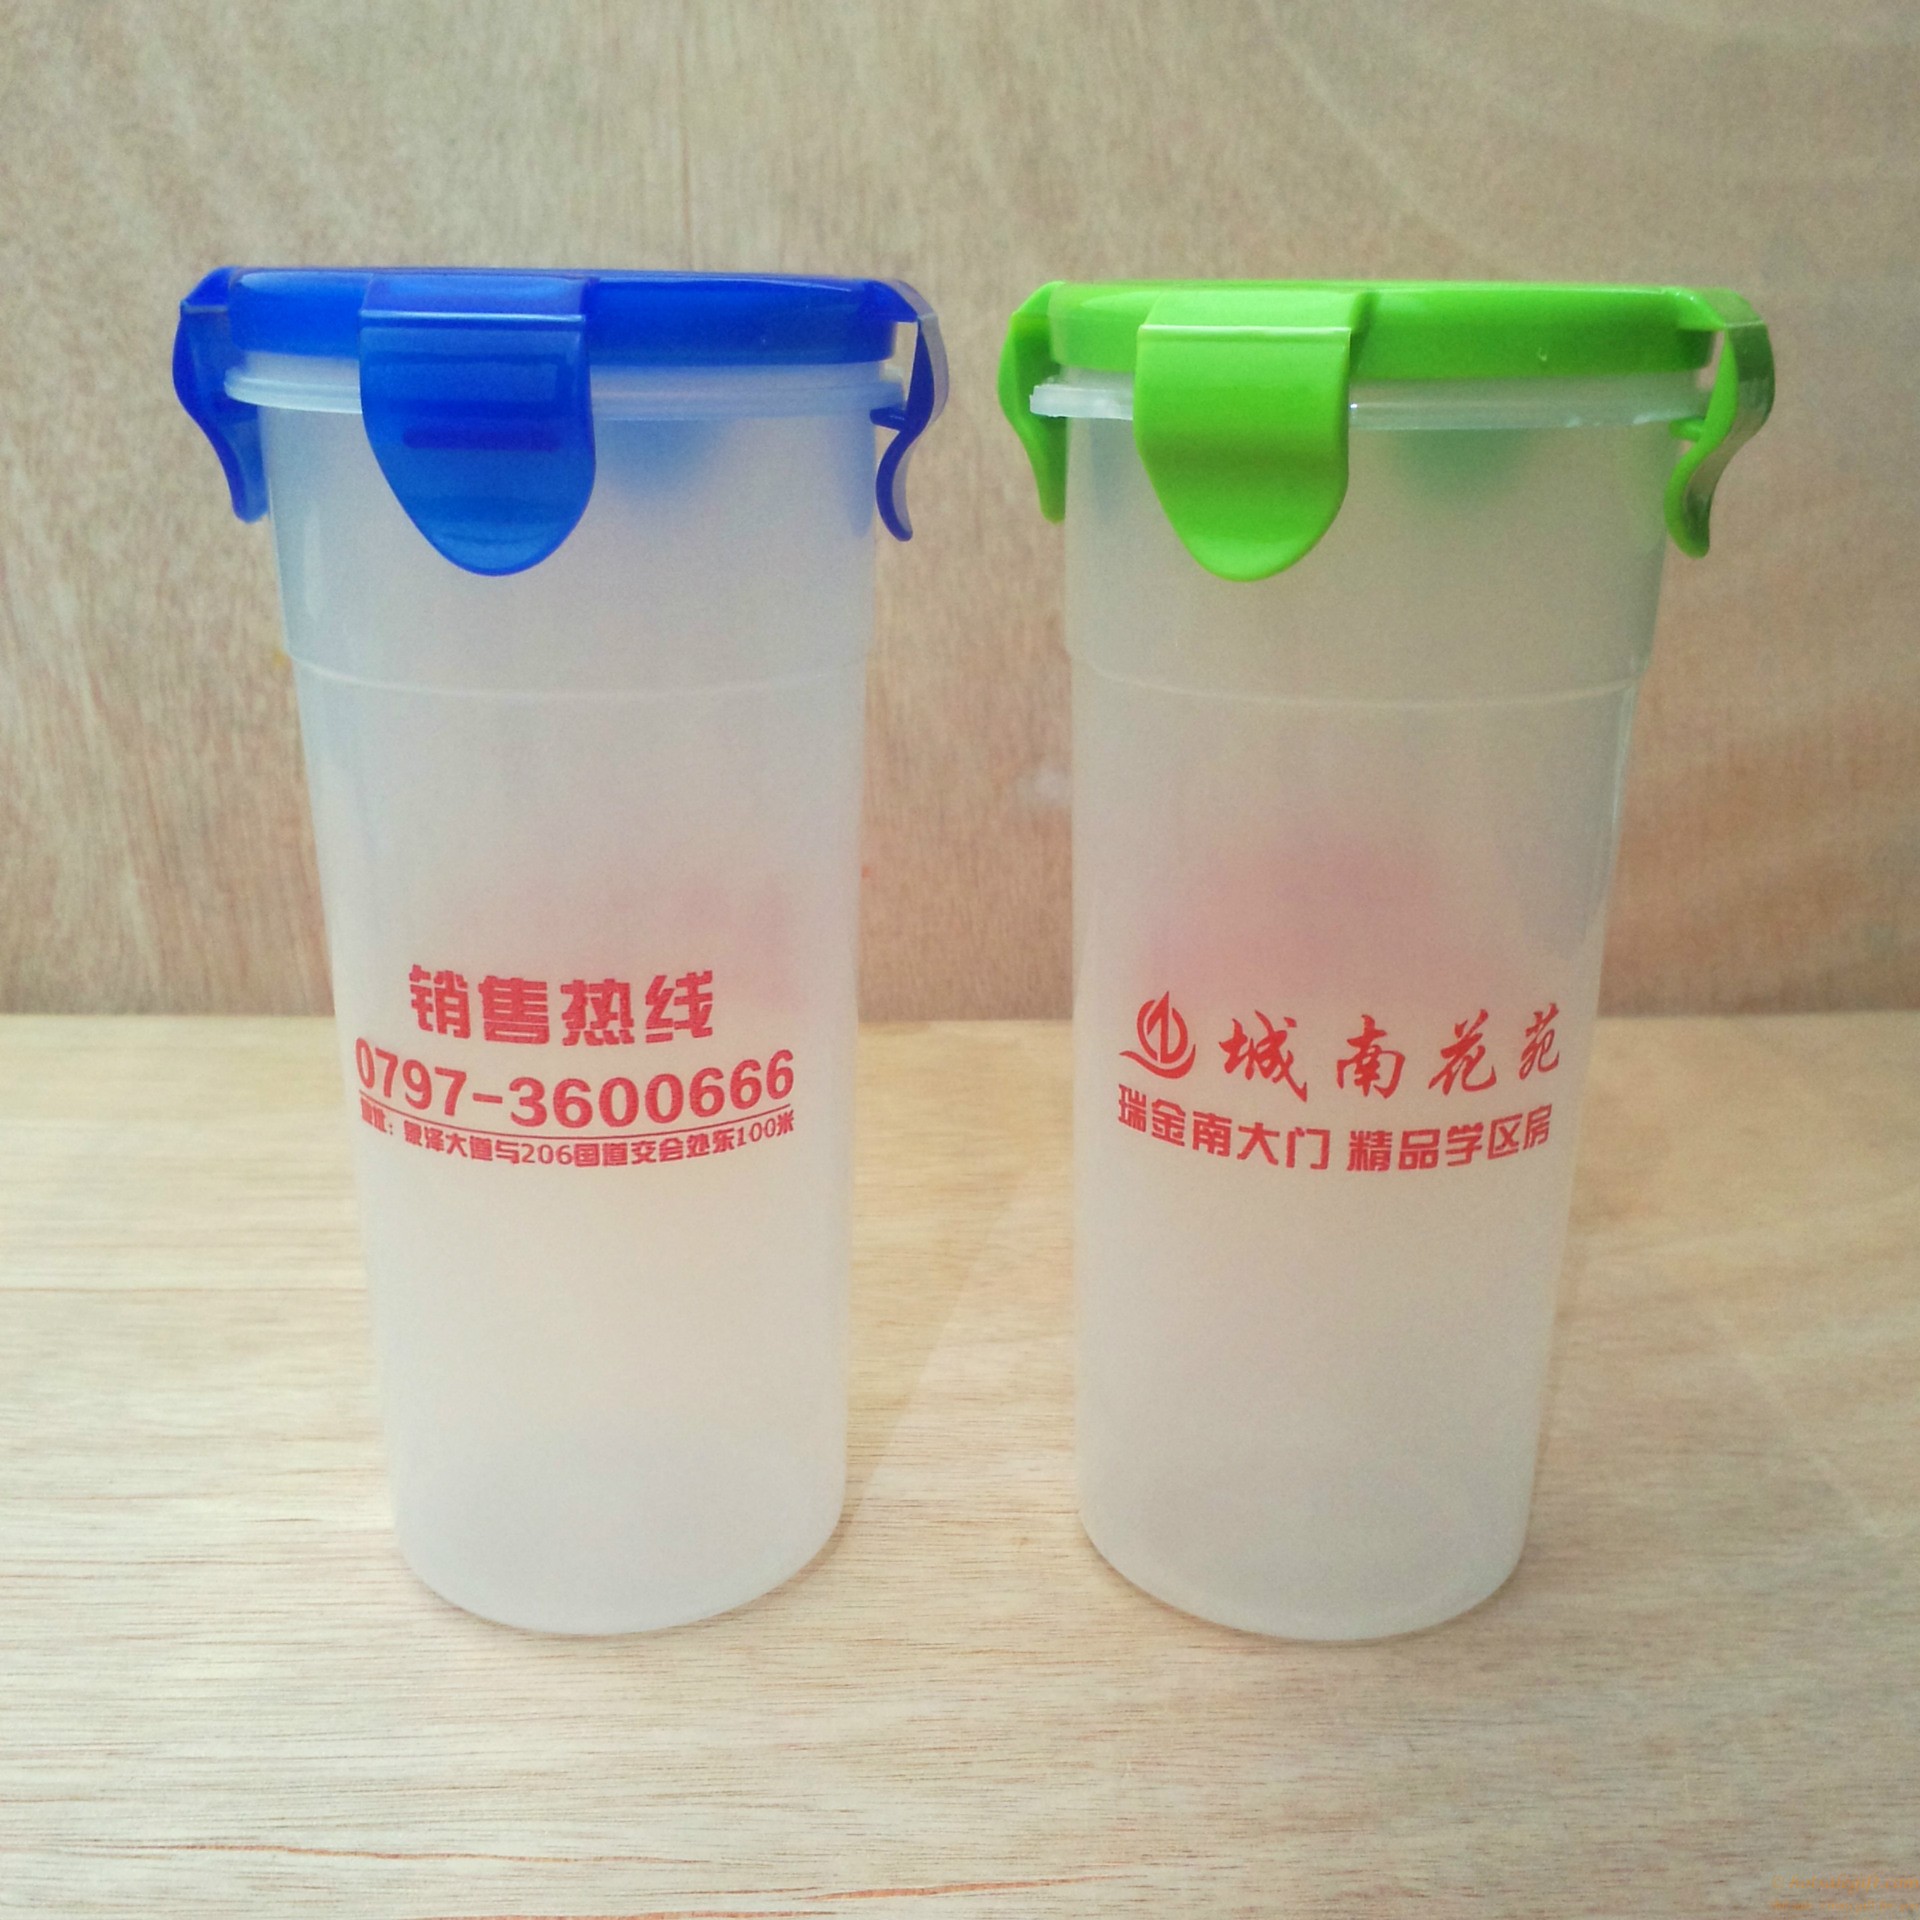 hotsalegift double plastic cups creative promotional gifts advertising water bottle printed logo 2